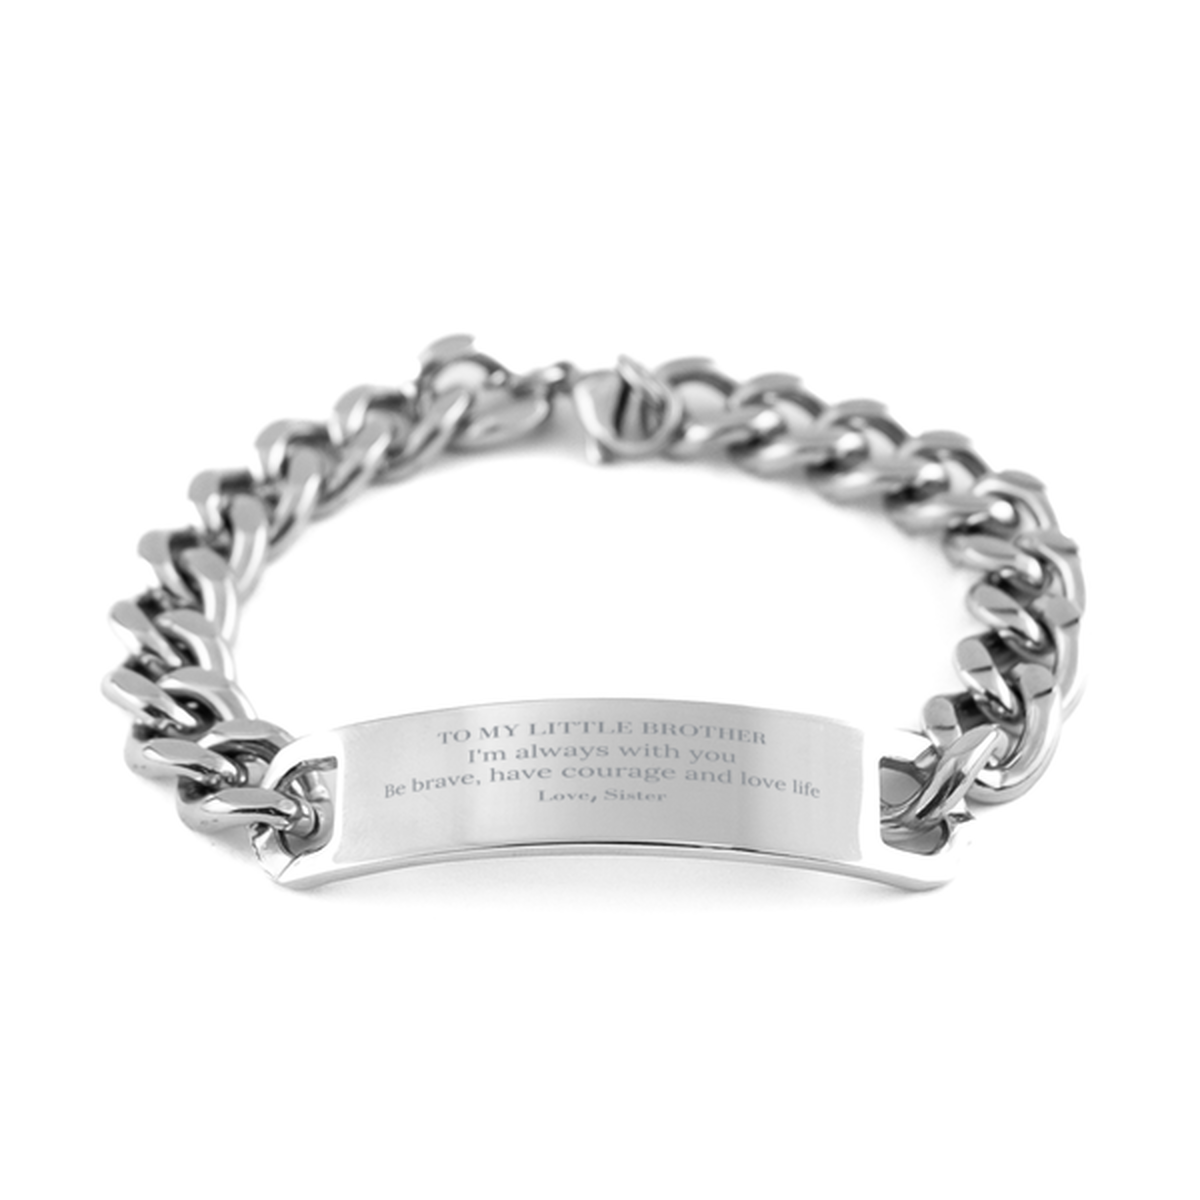 To My Little Brother Gifts from Sister, Unique Cuban Chain Stainless Steel Bracelet Inspirational Christmas Birthday Graduation Gifts for Little Brother I'm always with you. Be brave, have courage and love life. Love, Sister